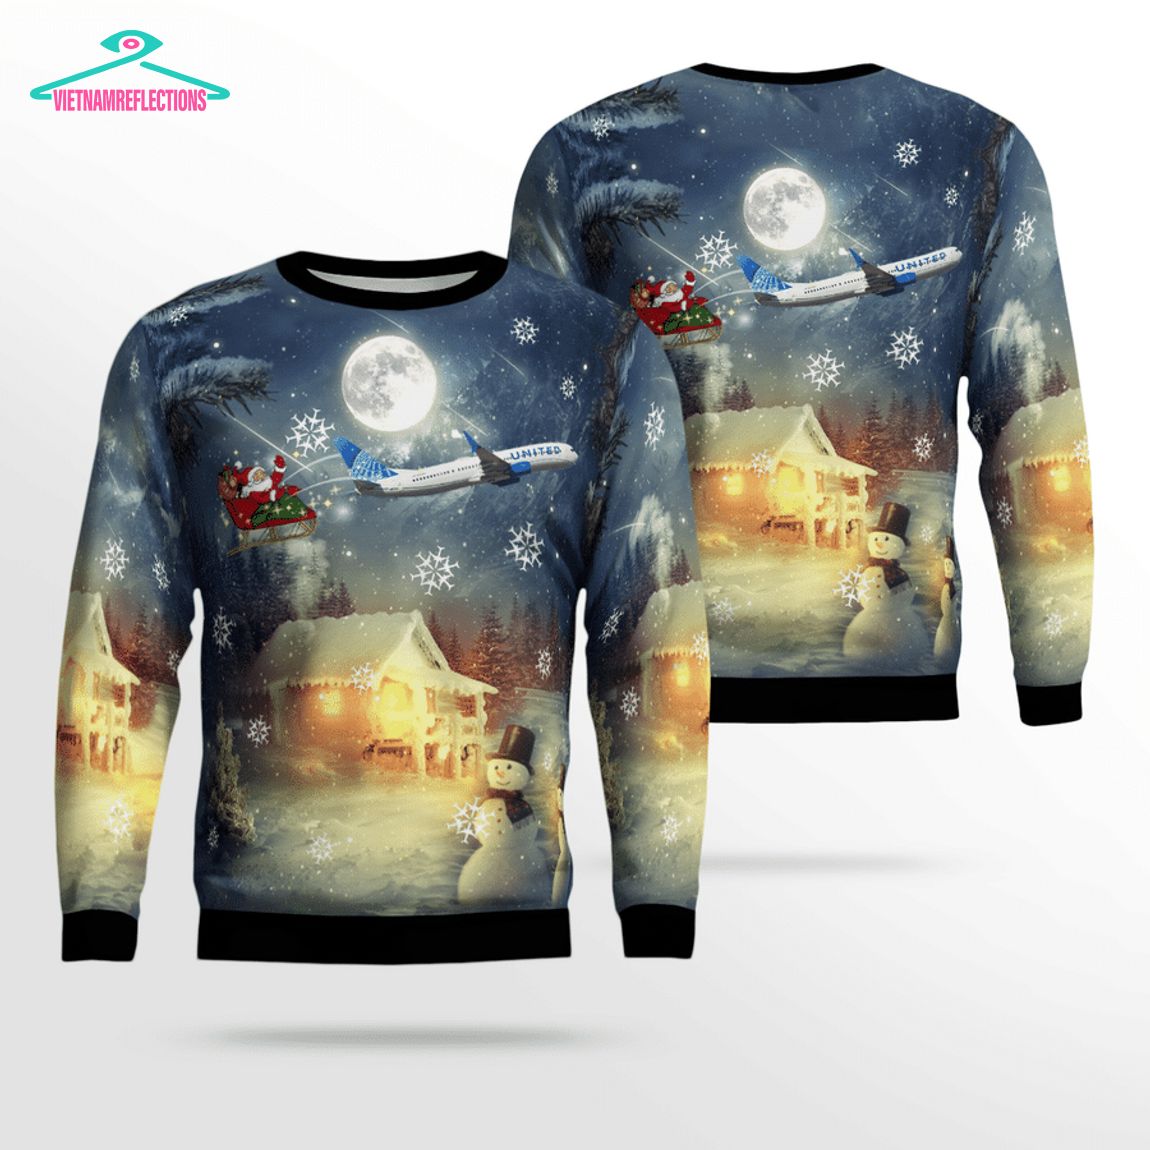 United Airlines Boeing 737-924ER 3D Christmas Sweater